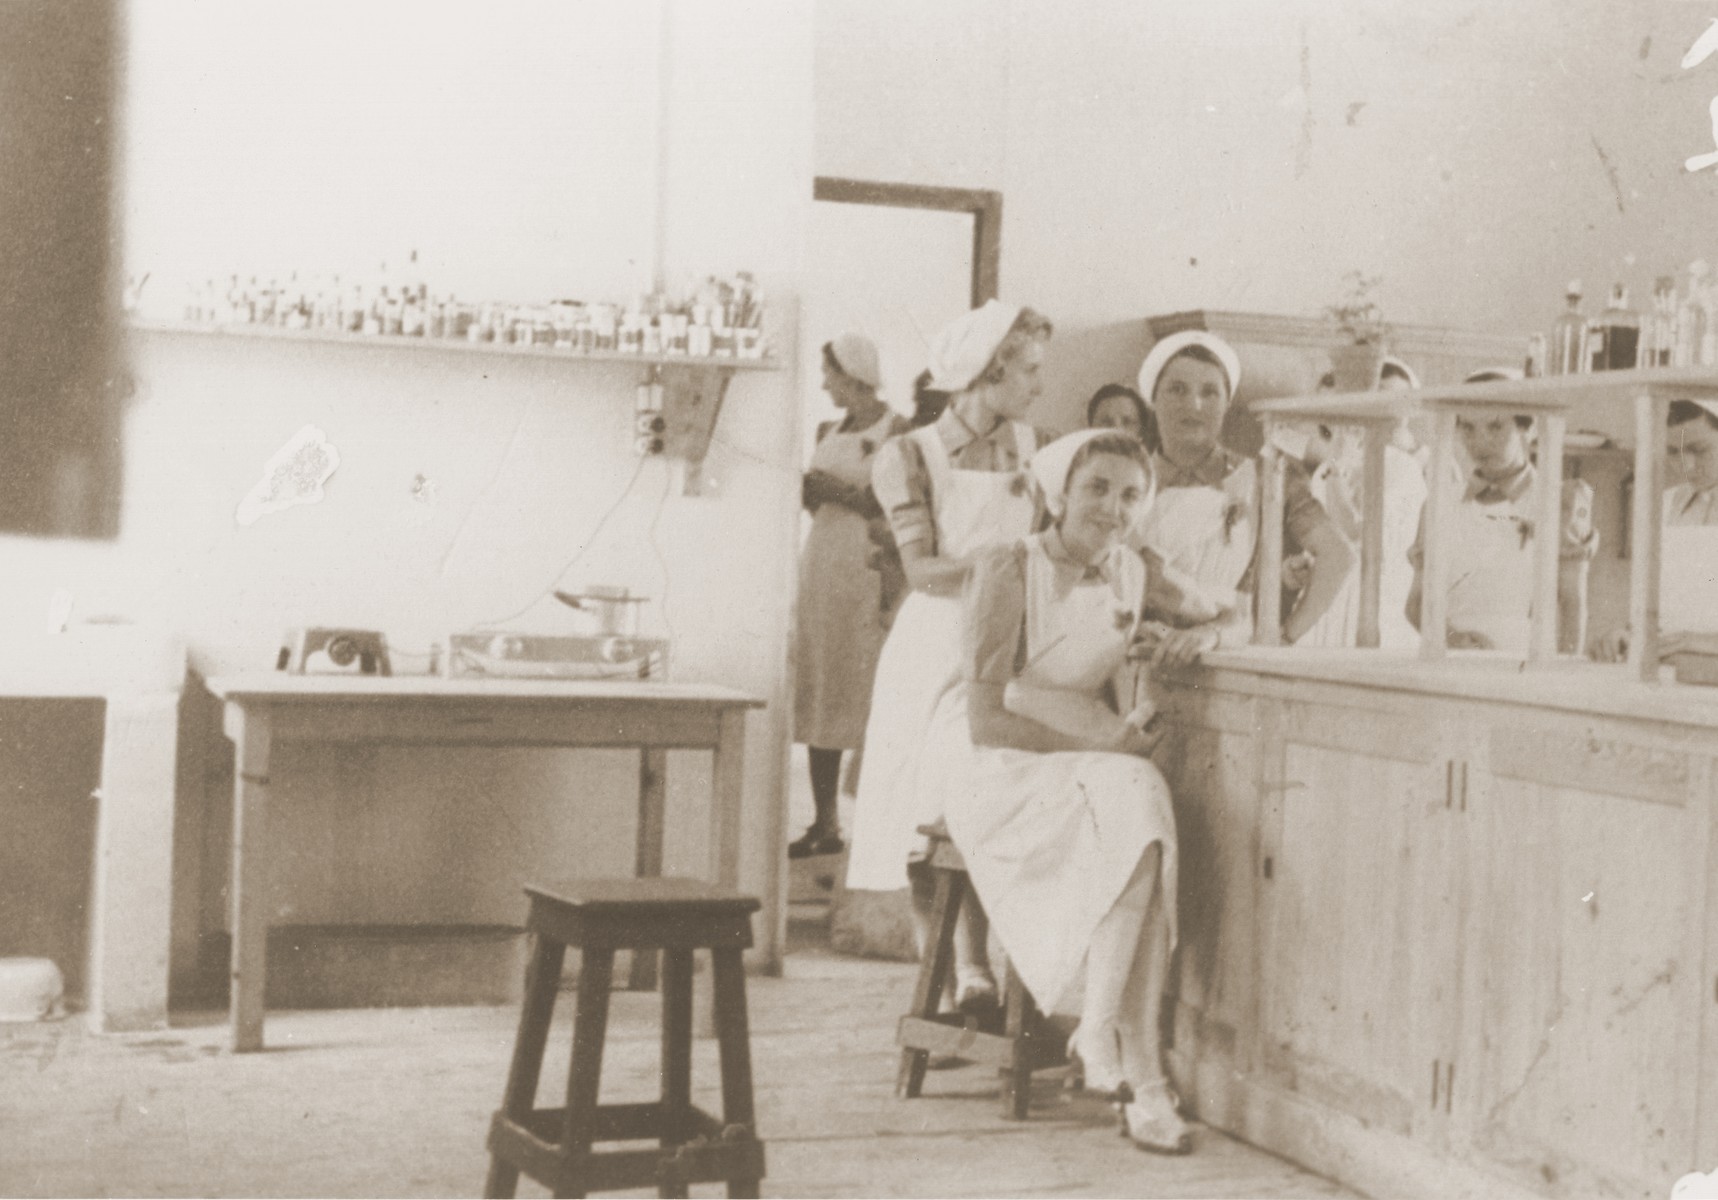 Nurses in the "laboratory" of the Recebedou camp infirmary. The woman seated could be Madame Rives. Behind her, in profile, is a nurse who was a delegate of the Red Cross.